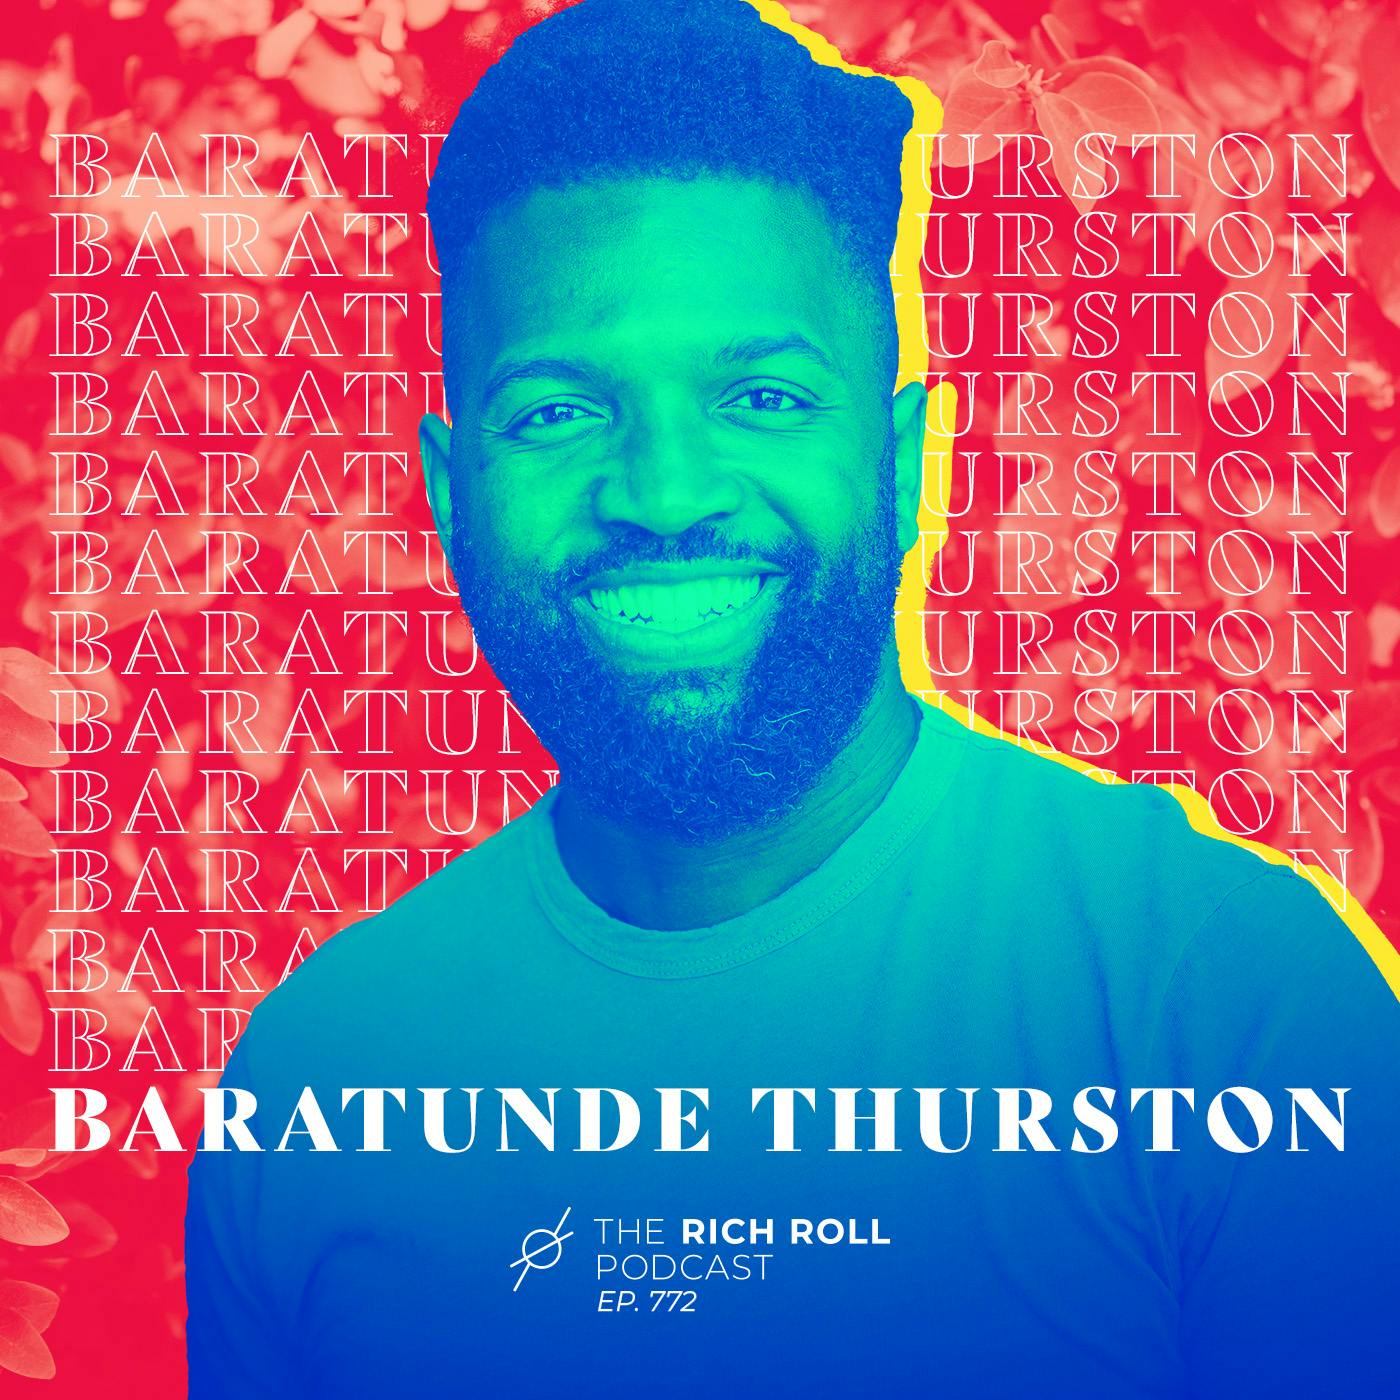 Baratunde Thurston On Social Media Perils, Institutional Distrust & Why Empathy Is The Solution To Our Political Divide